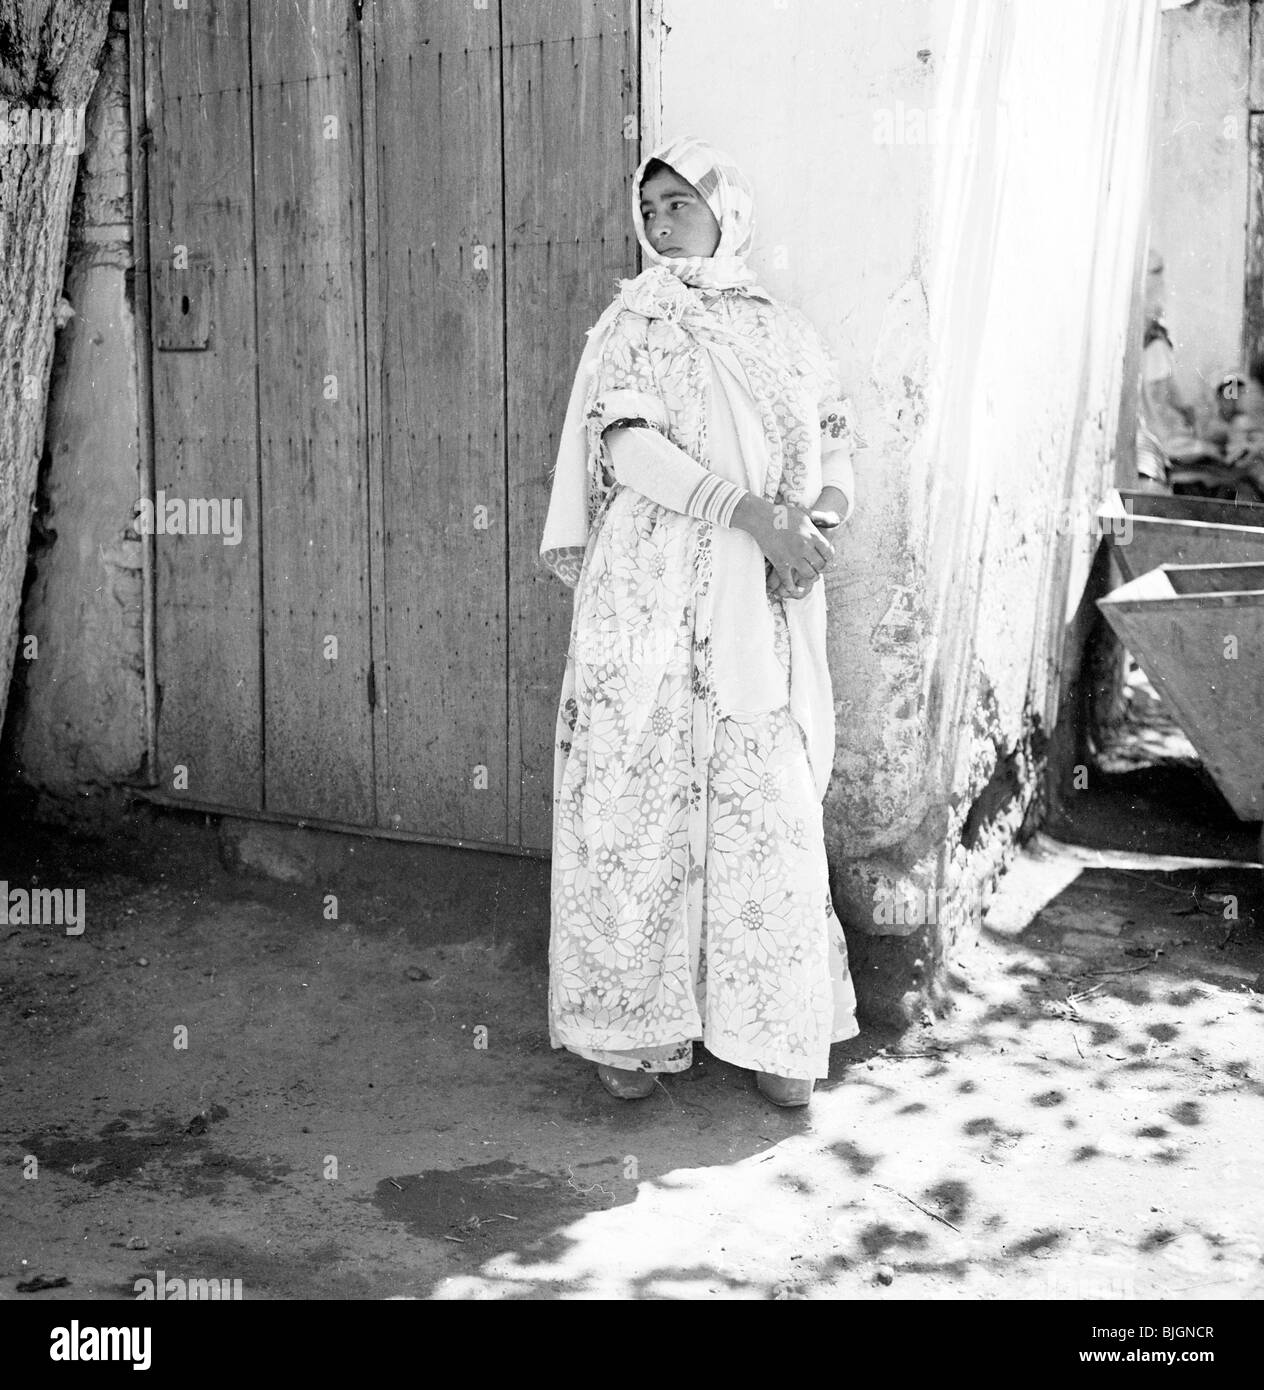 Young lady wearing headdress and long gown standing by old wooden door at corner of stone building, Morocco, 1950s. Stock Photo